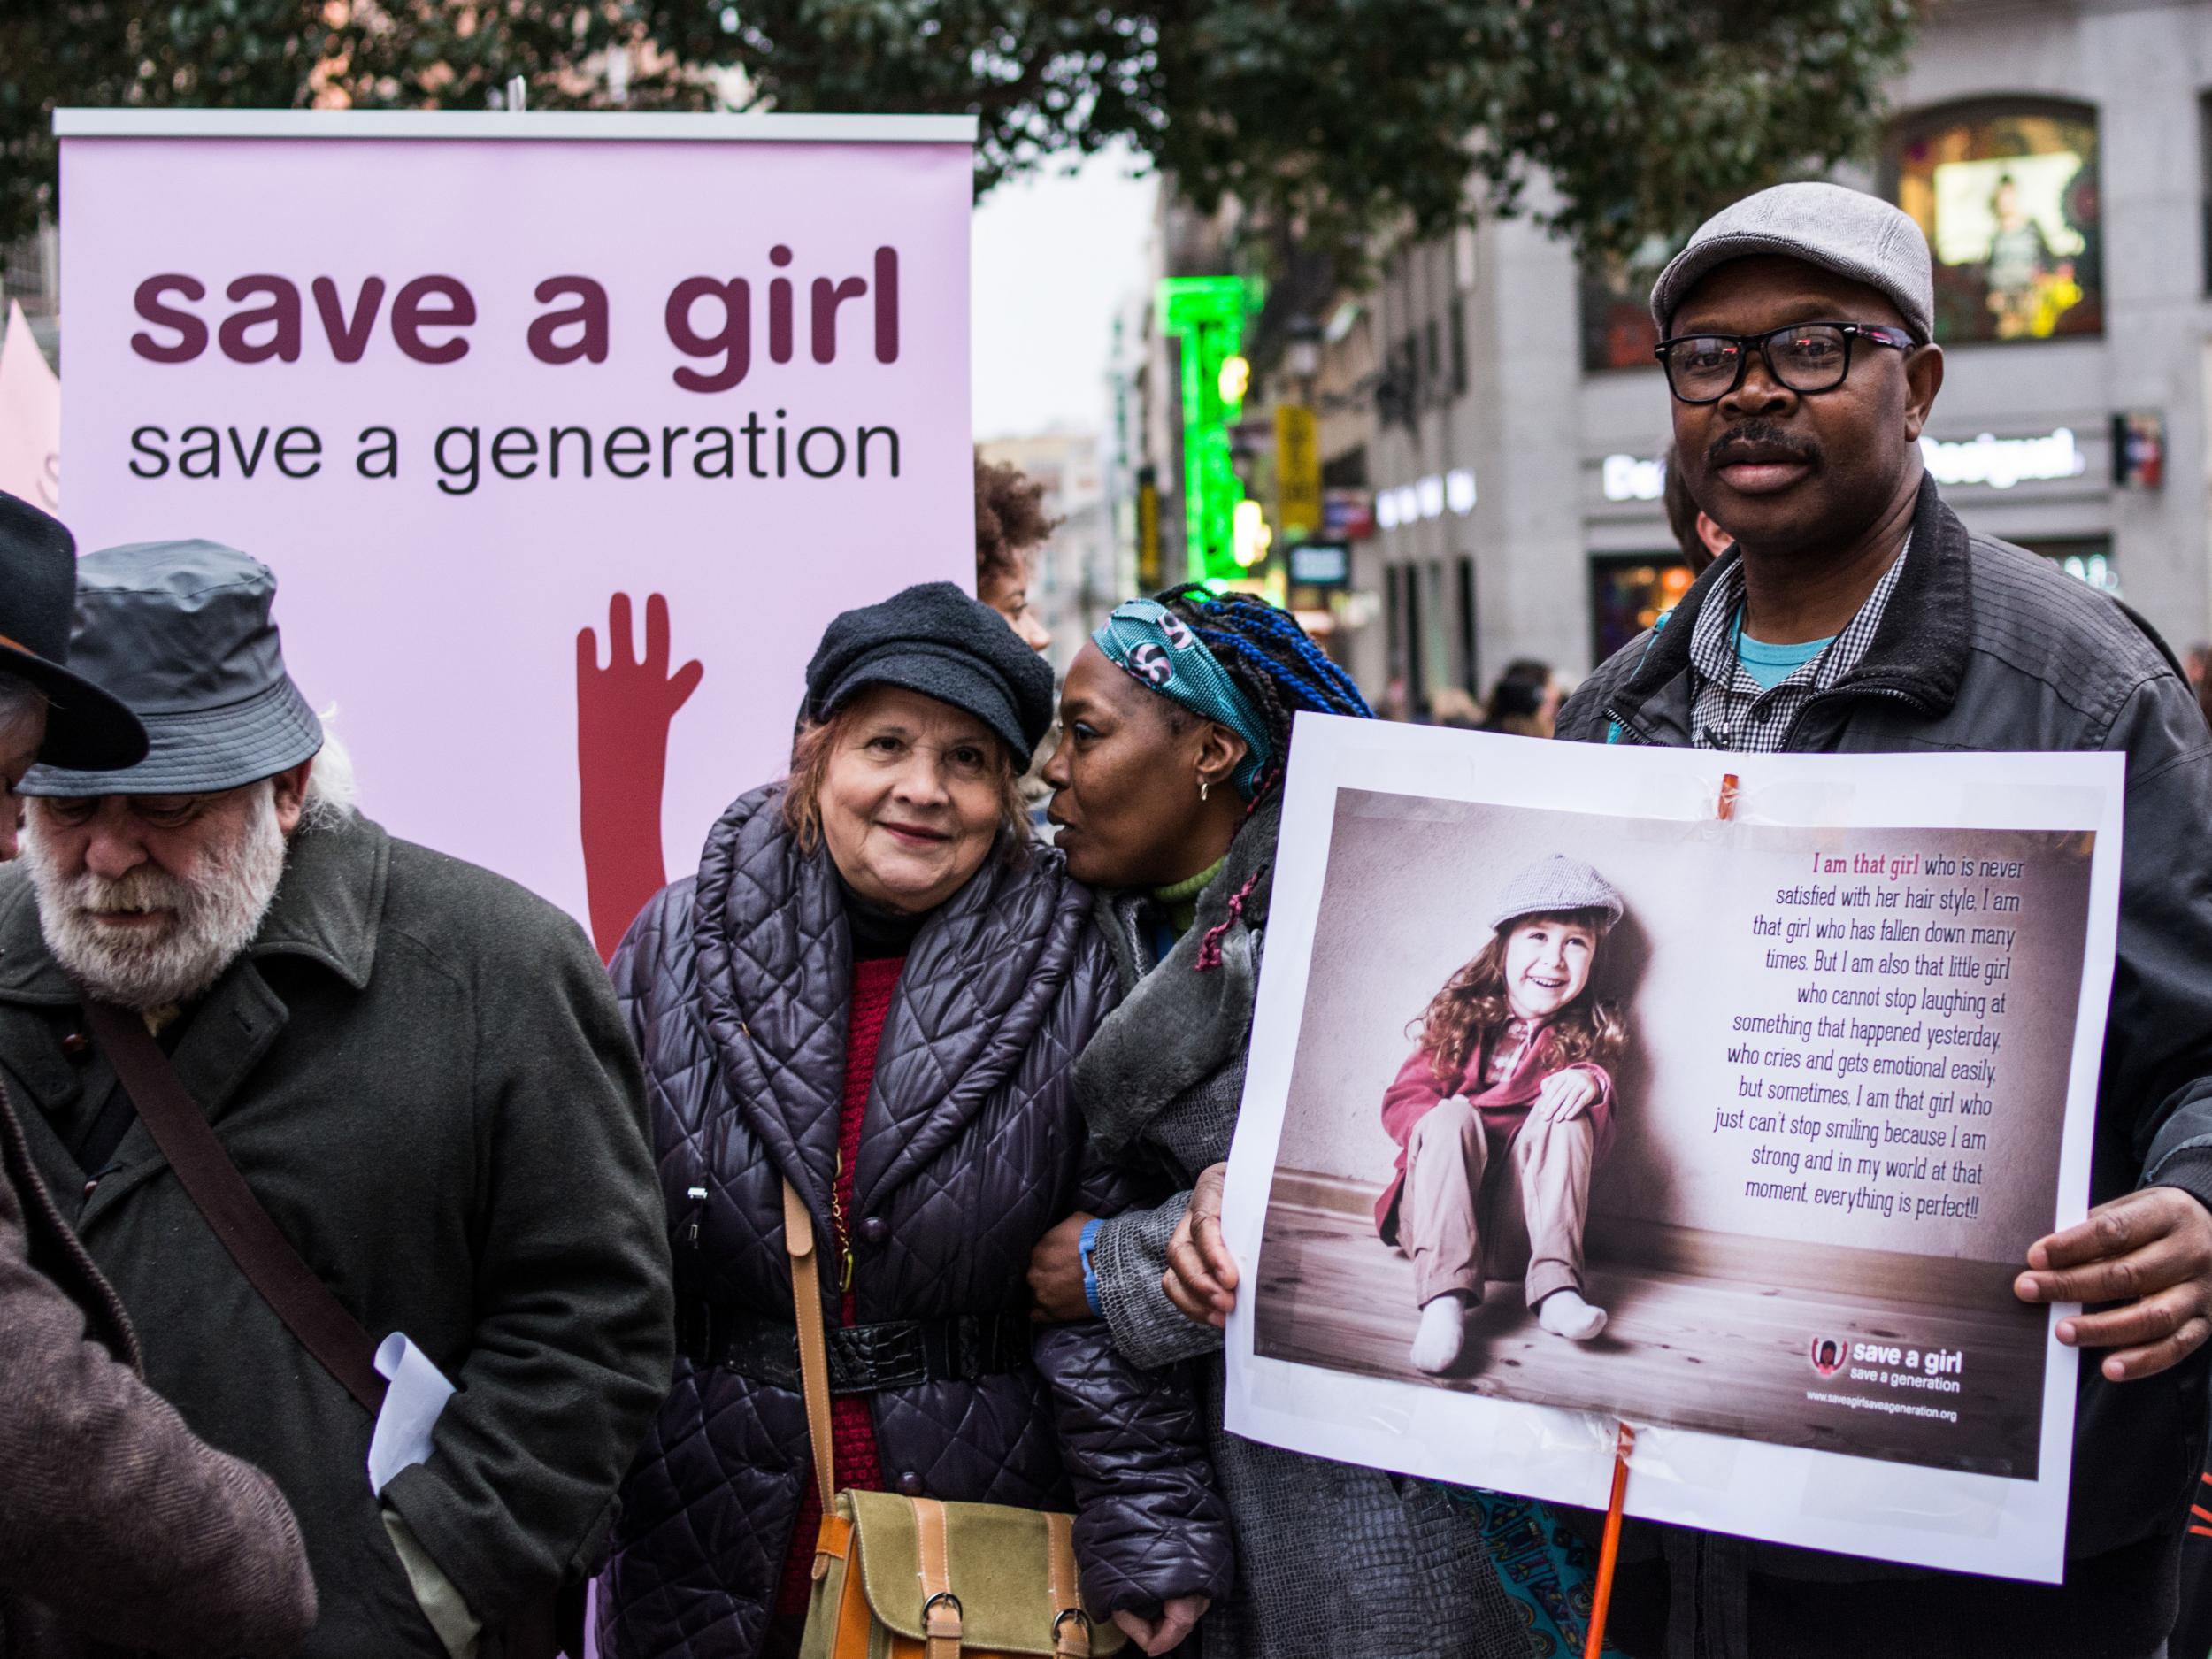 People protesting during the International Day Against Female Genital Mutilation in Madrid, Spain